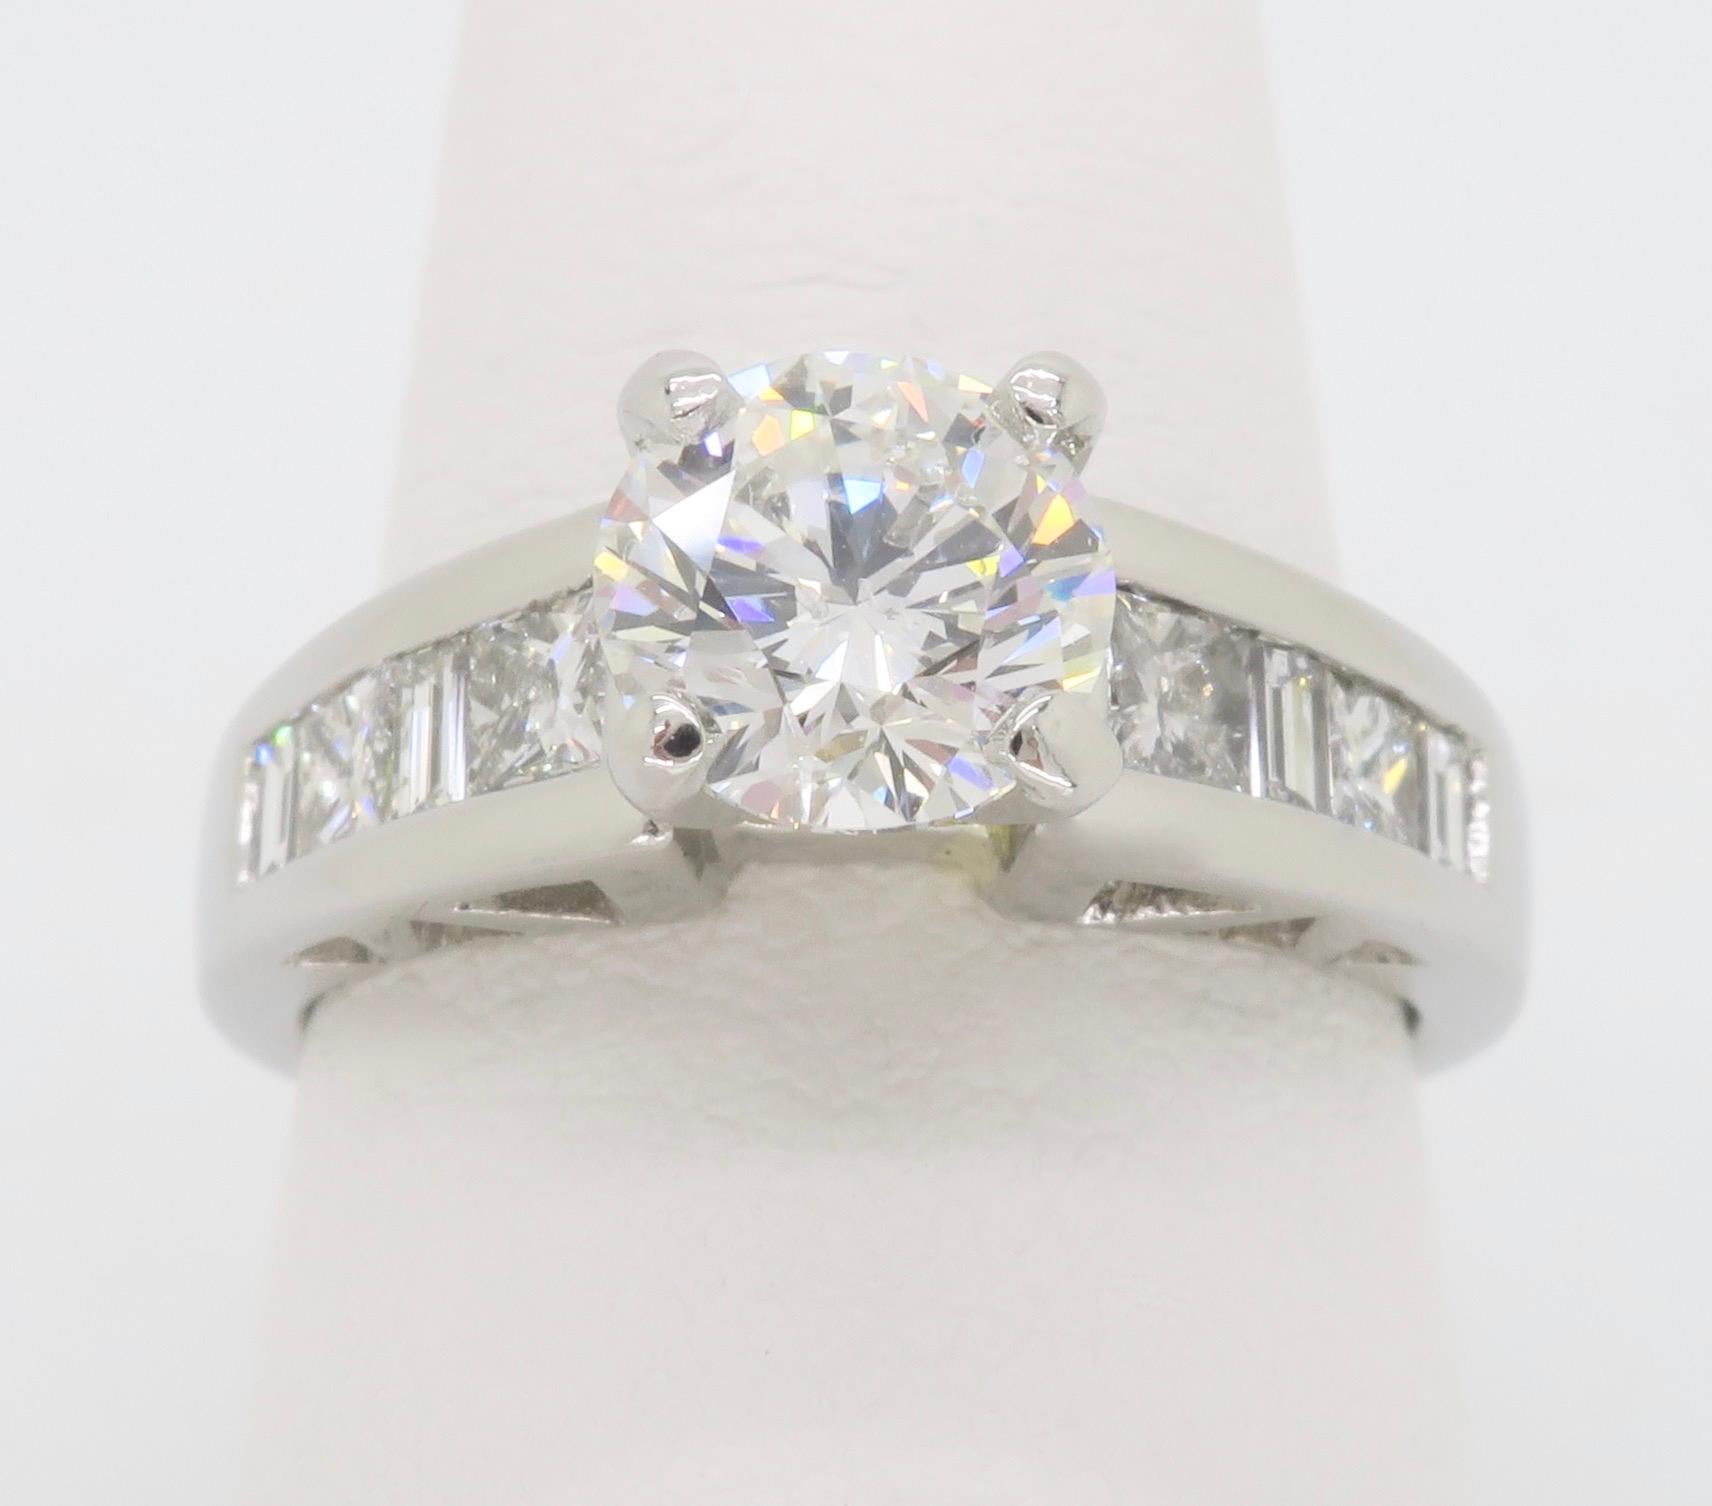 Certified 2.03CTW Diamond ring crafted in Platinum with Princess & Baguette cut accent diamonds. 

Center Diamond Carat Weight: 1.23CT
Center Diamond Cut: Round Brilliant Cut
Center Diamond Color: F
Center Diamond Clarity: SI2
Certification: IGI -